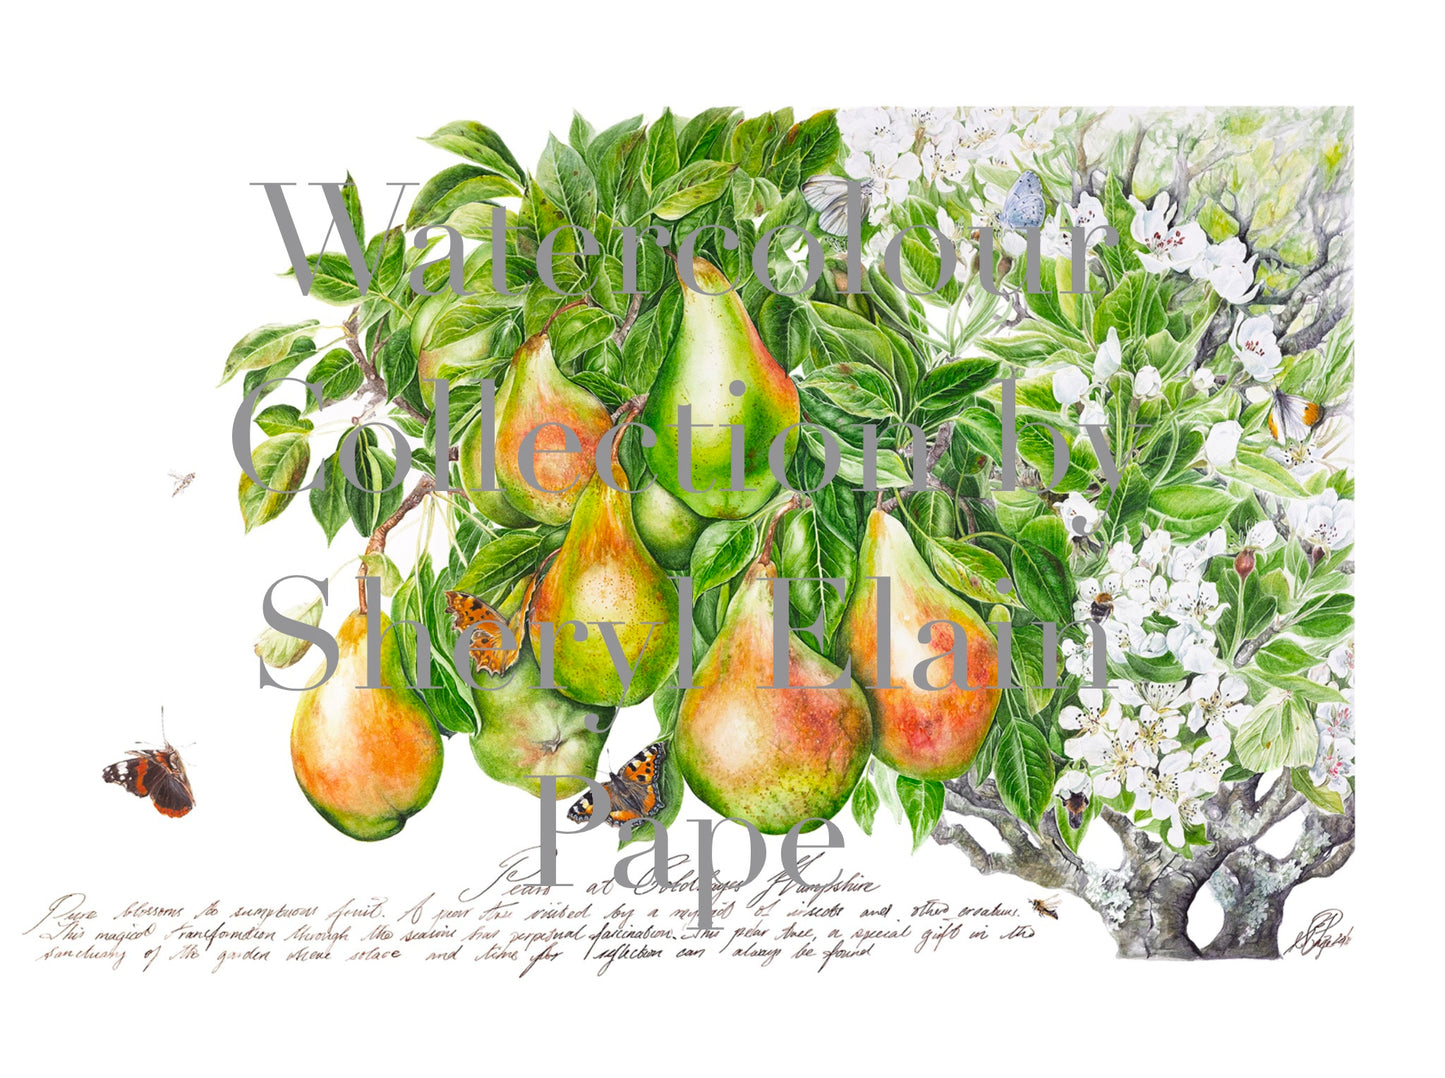 'Pears at Coldhayes' Limited Edition Prints